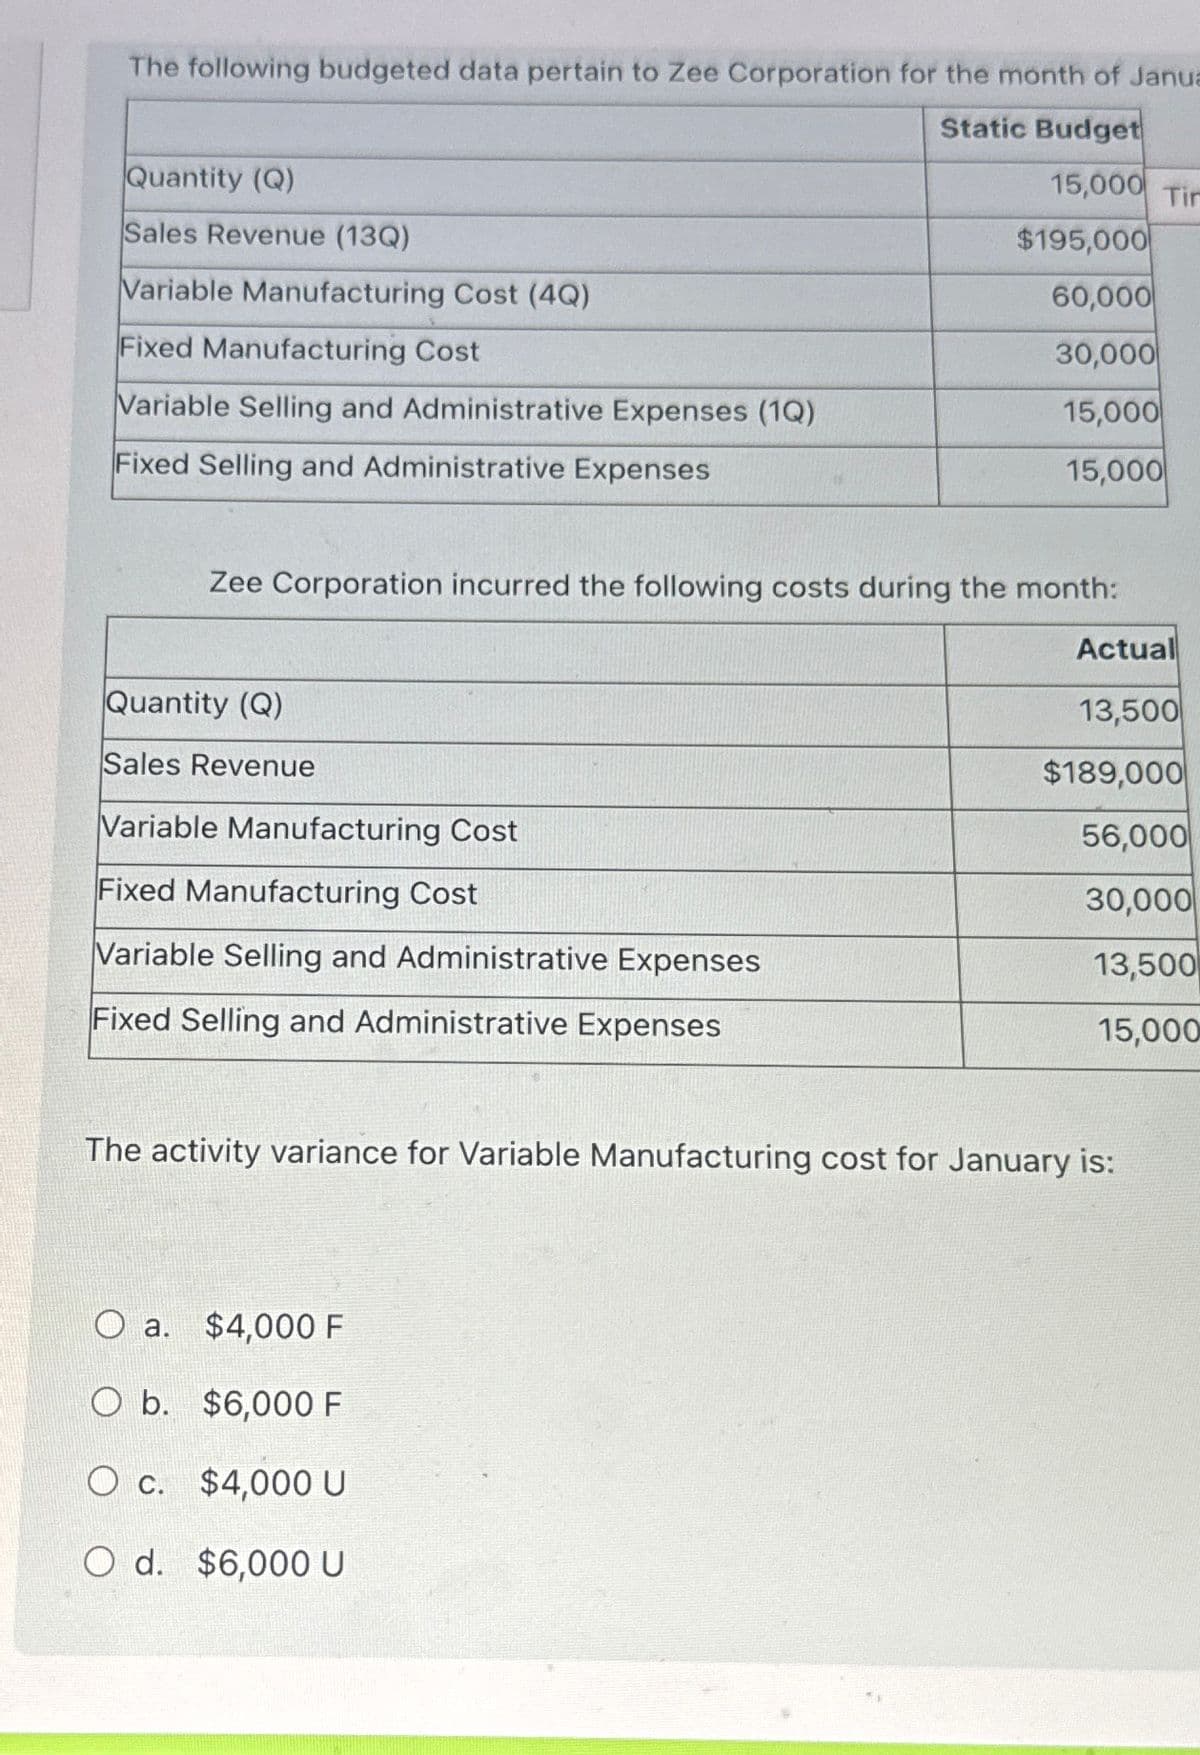 The following budgeted data pertain to Zee Corporation for the month of Janua
Quantity (Q)
Static Budget
15,000 Tir
Sales Revenue (13Q)
$195,000
Variable Manufacturing Cost (4Q)
60,000
Fixed Manufacturing Cost
30,000
Variable Selling and Administrative Expenses (1Q)
15,000
Fixed Selling and Administrative Expenses
15,000
Zee Corporation incurred the following costs during the month:
Actual
Quantity (Q)
13,500
Sales Revenue
$189,000
Variable Manufacturing Cost
56,000
Fixed Manufacturing Cost
30,000
Variable Selling and Administrative Expenses
13,500
Fixed Selling and Administrative Expenses
15,000
The activity variance for Variable Manufacturing cost for January is:
O a. $4,000 F
O b. $6,000 F
O c. $4,000 U
O d. $6,000 U